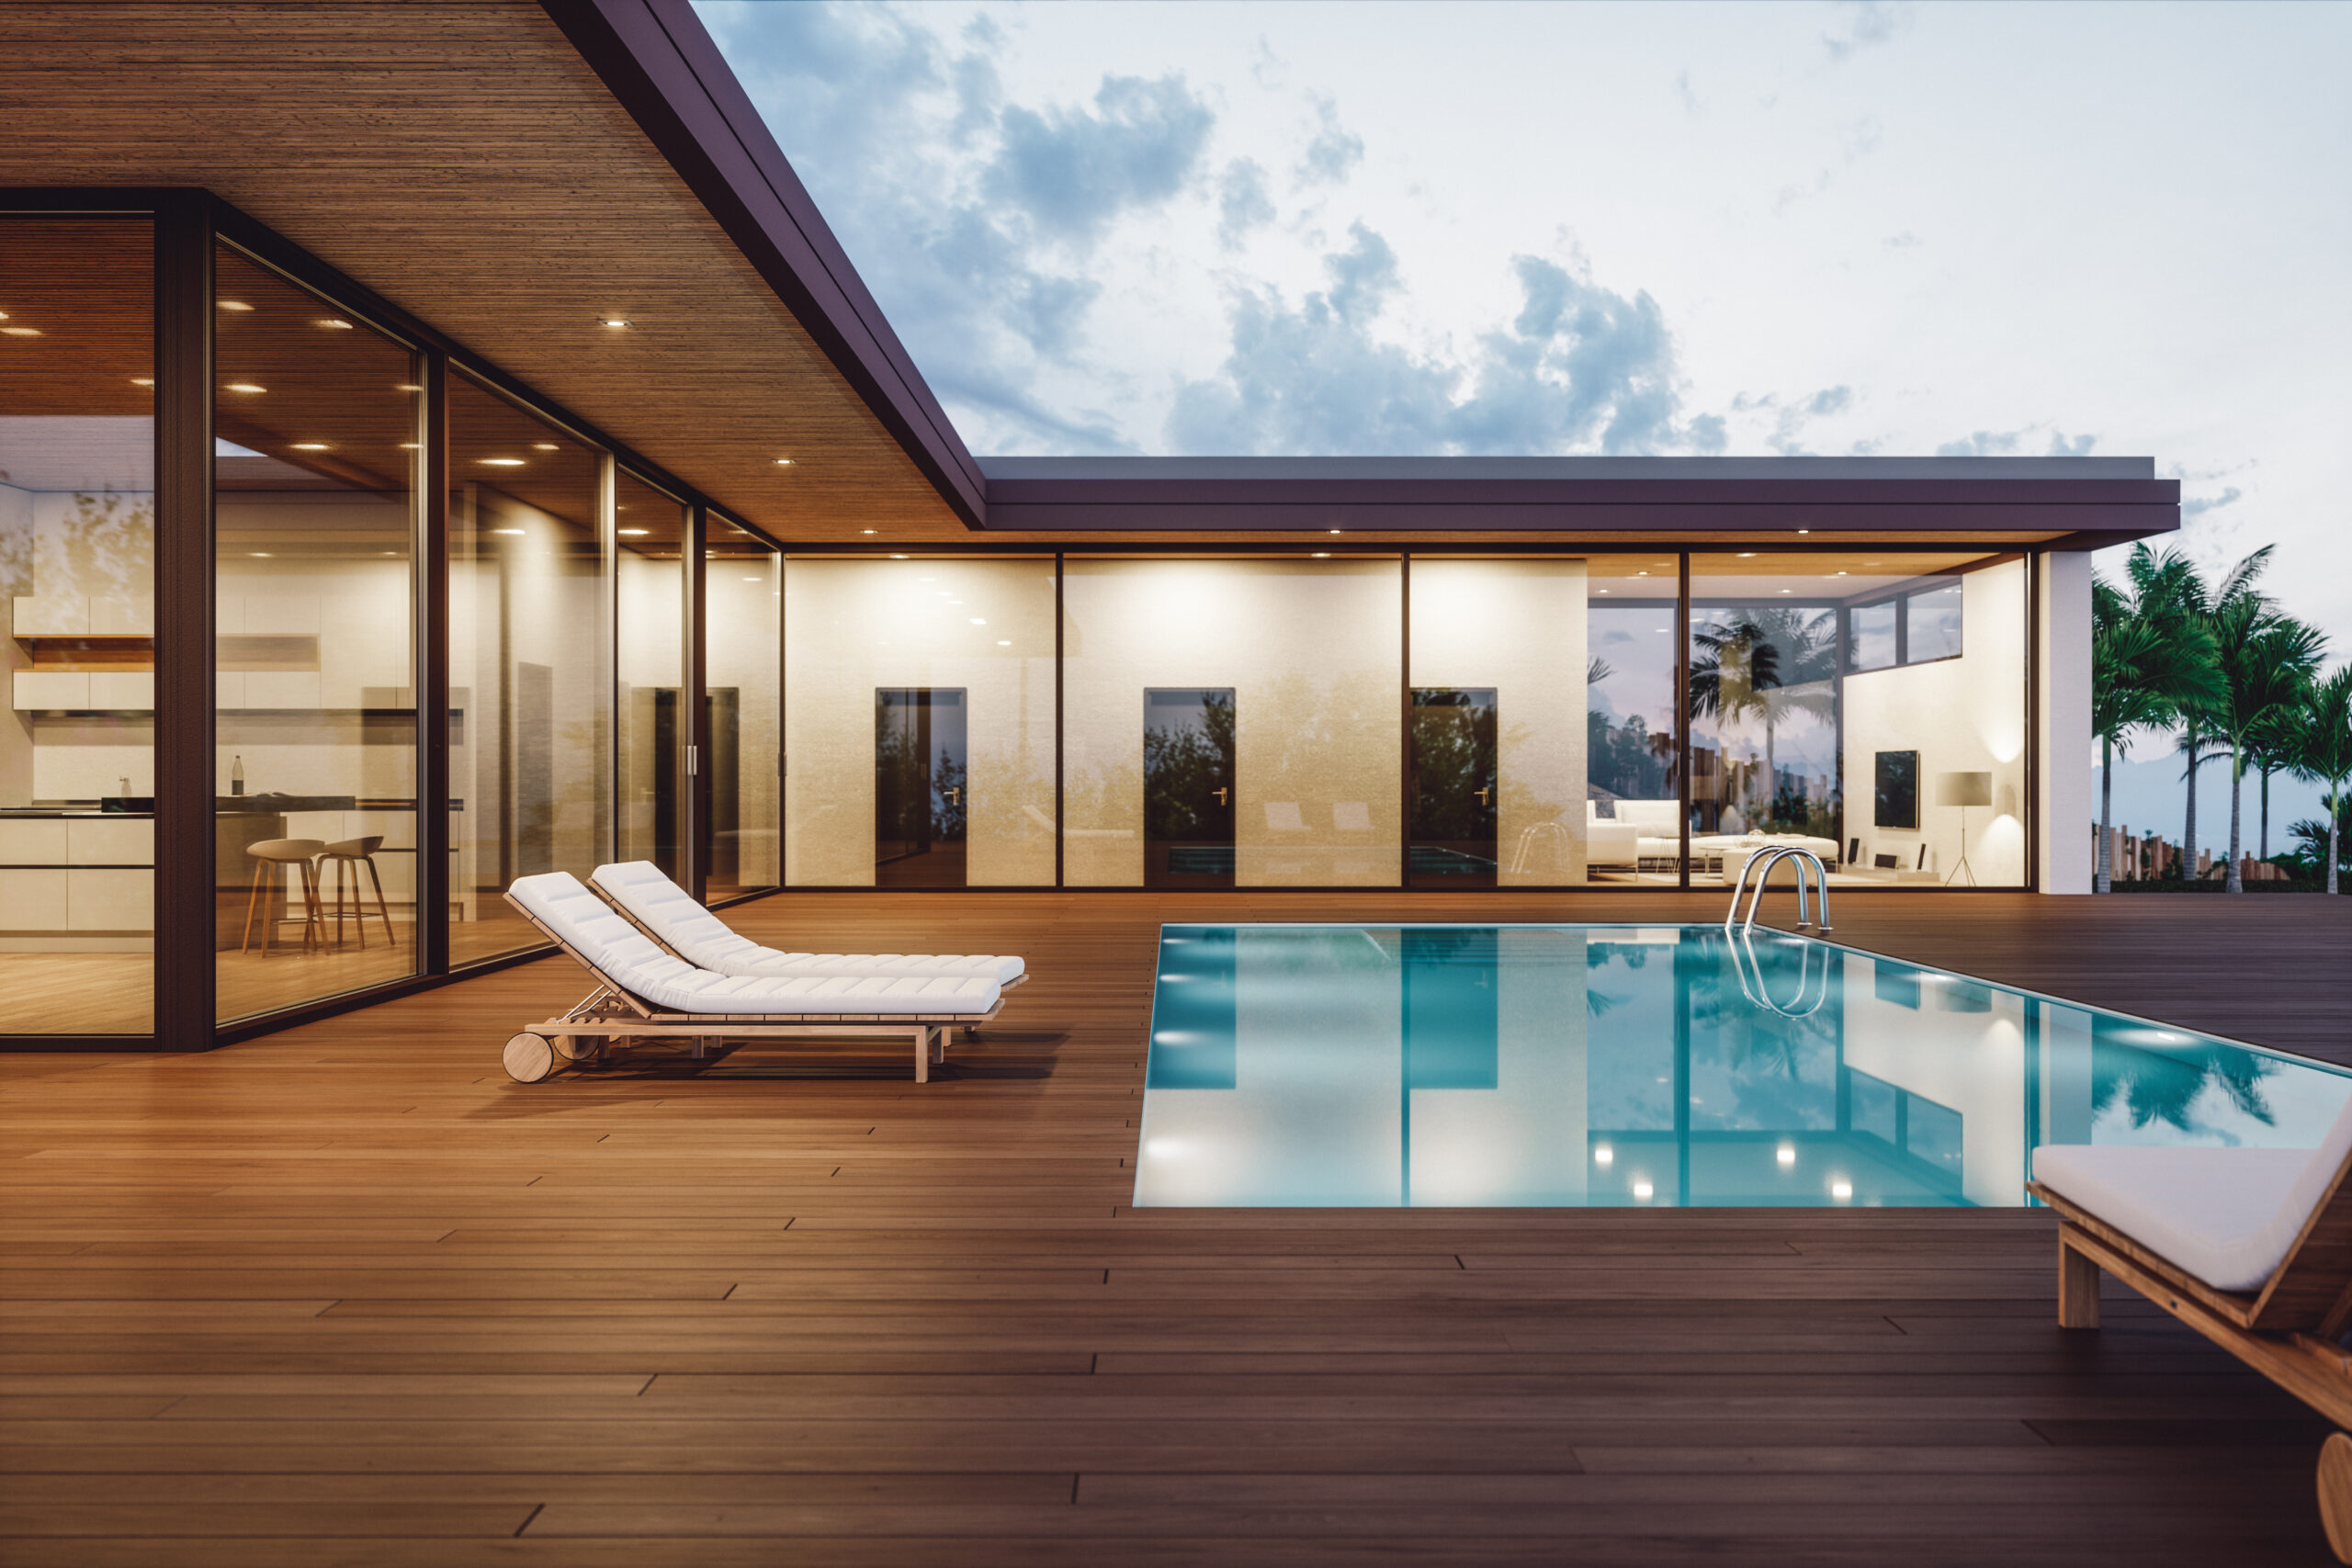 Modern Luxury House With Private Swimming Pool At Dusk